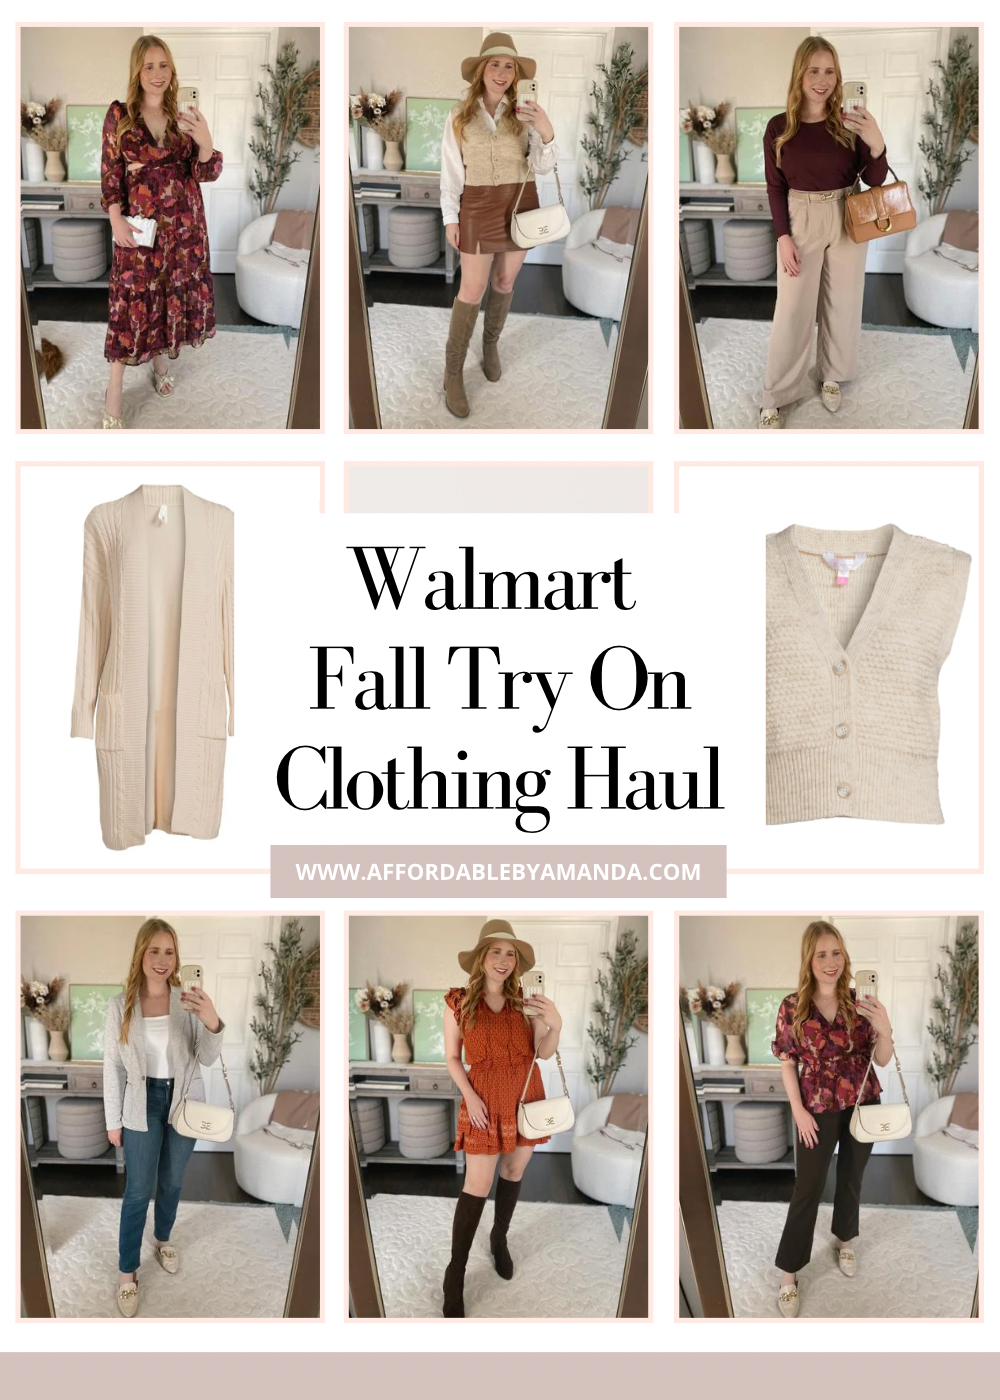 Why Walmart's new bet on fashion brands, home decor threatens specialty  chains | Reuters